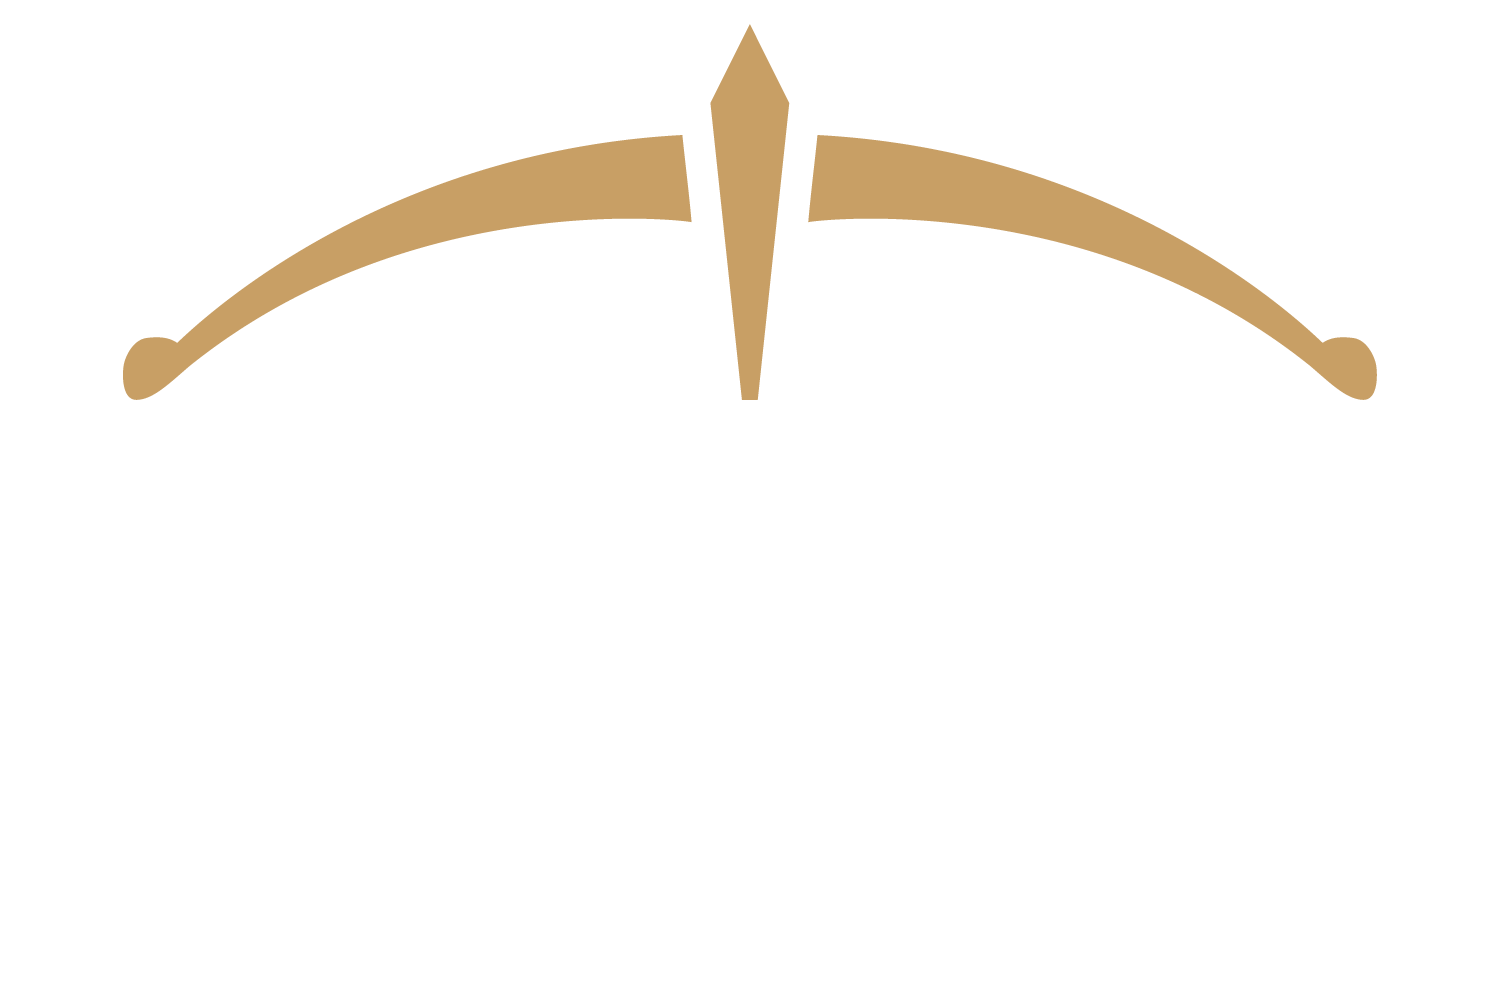 Lihnell´s Tropical Gin